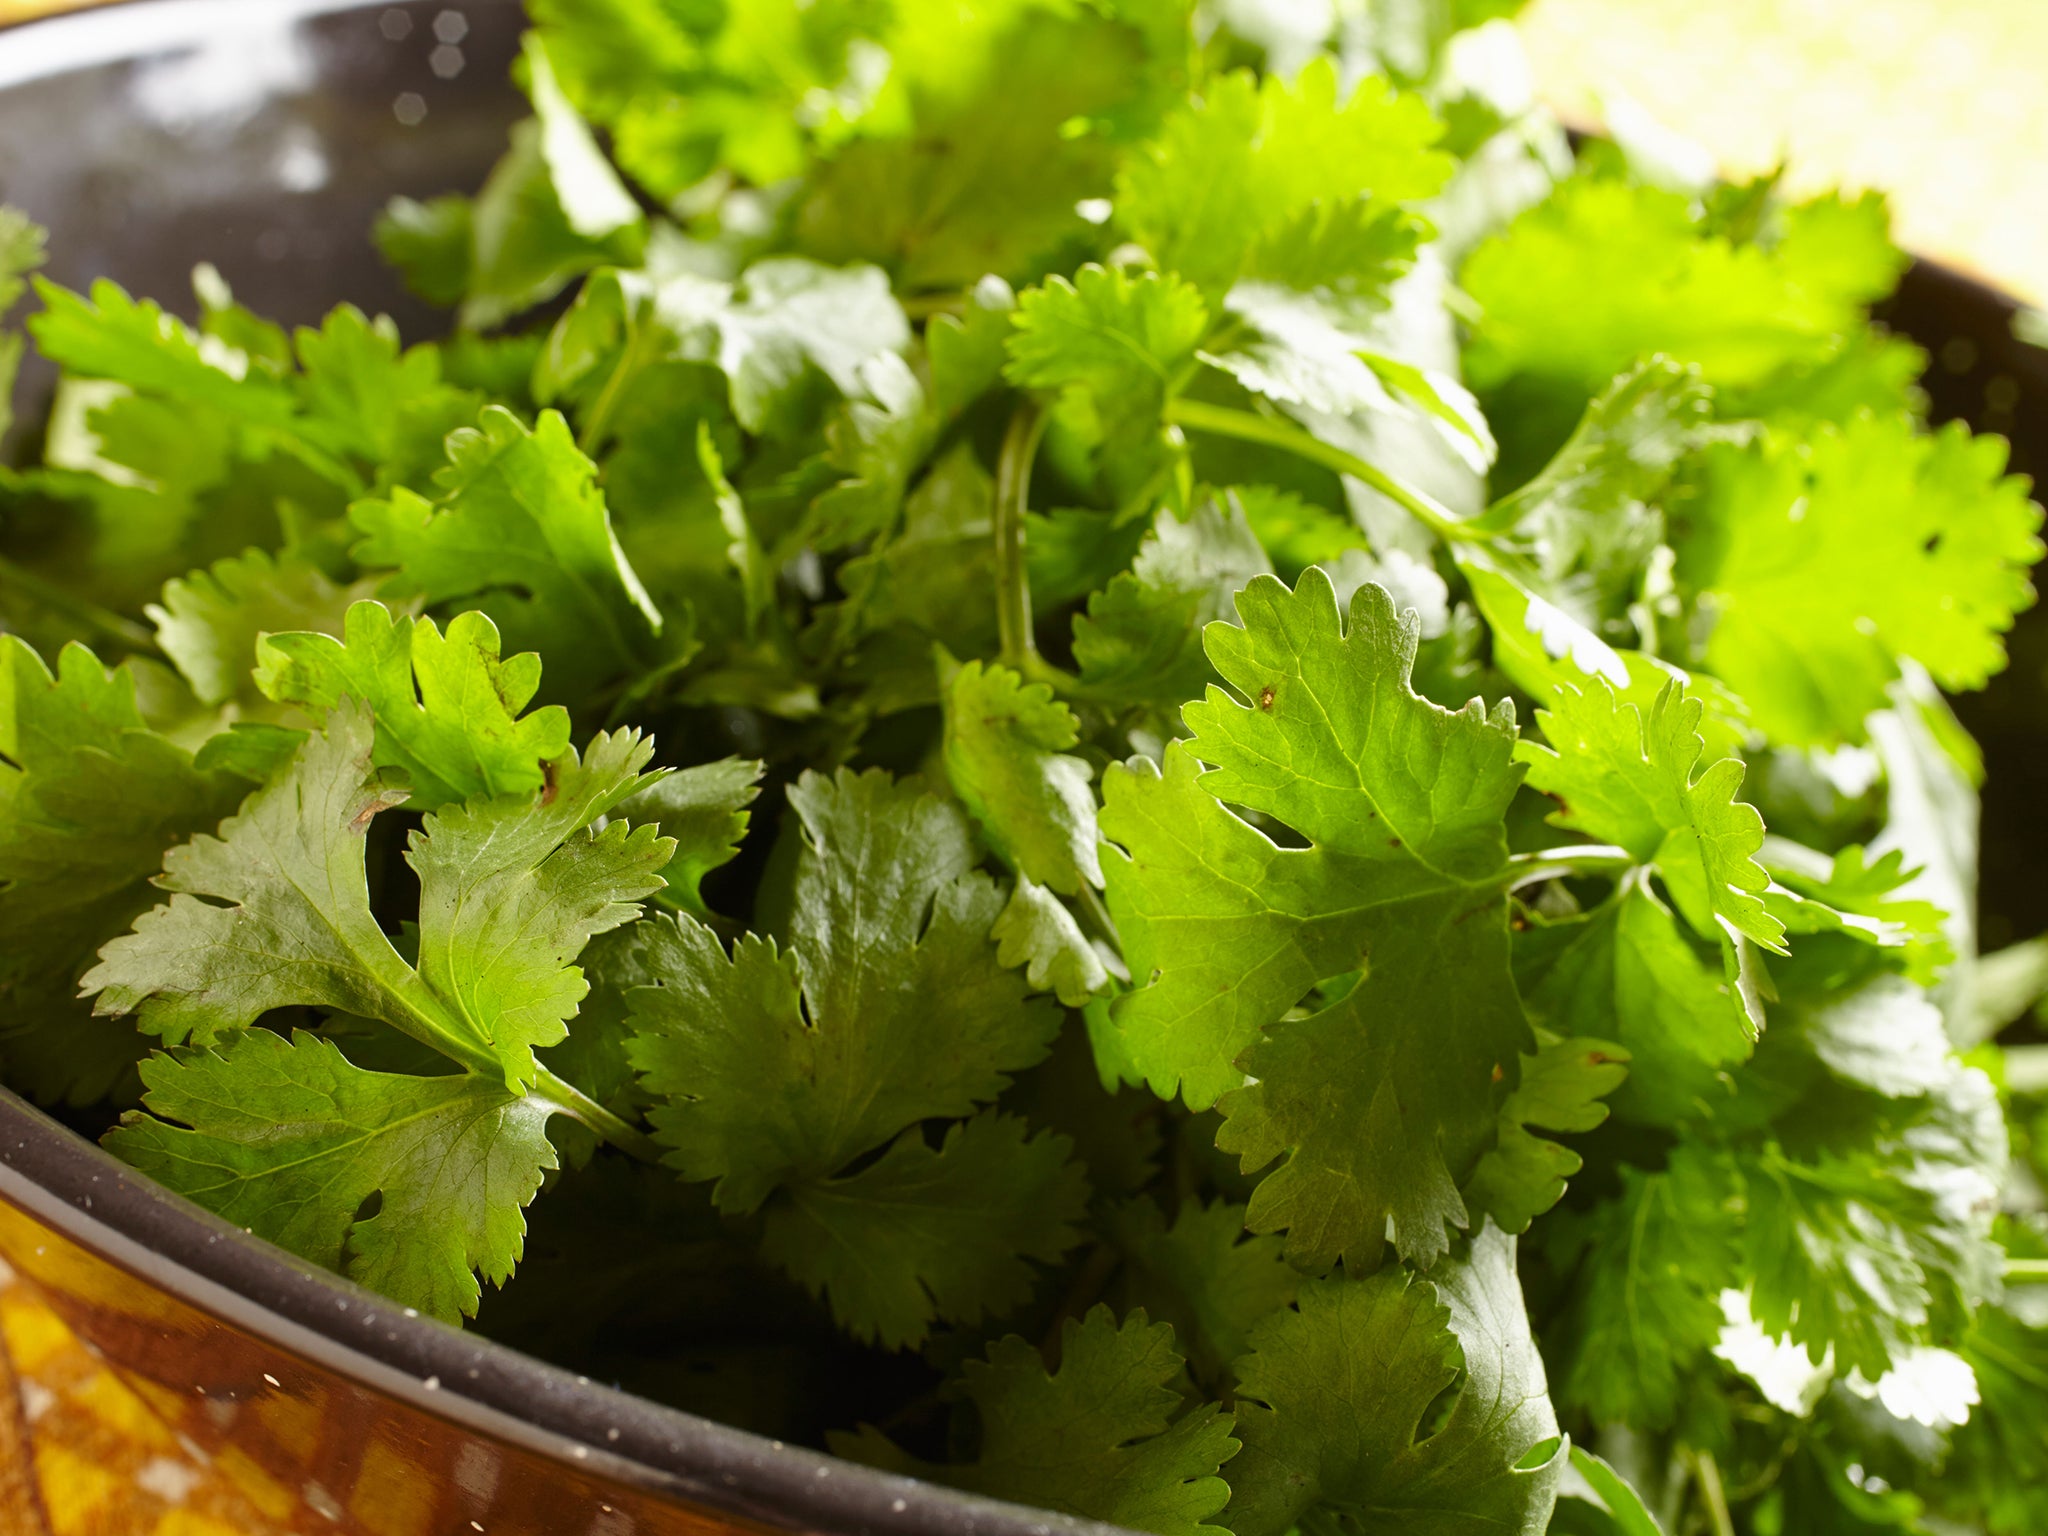 Most people find coriander to have an agreeable, citrus flavour, but to some its tastes like soap